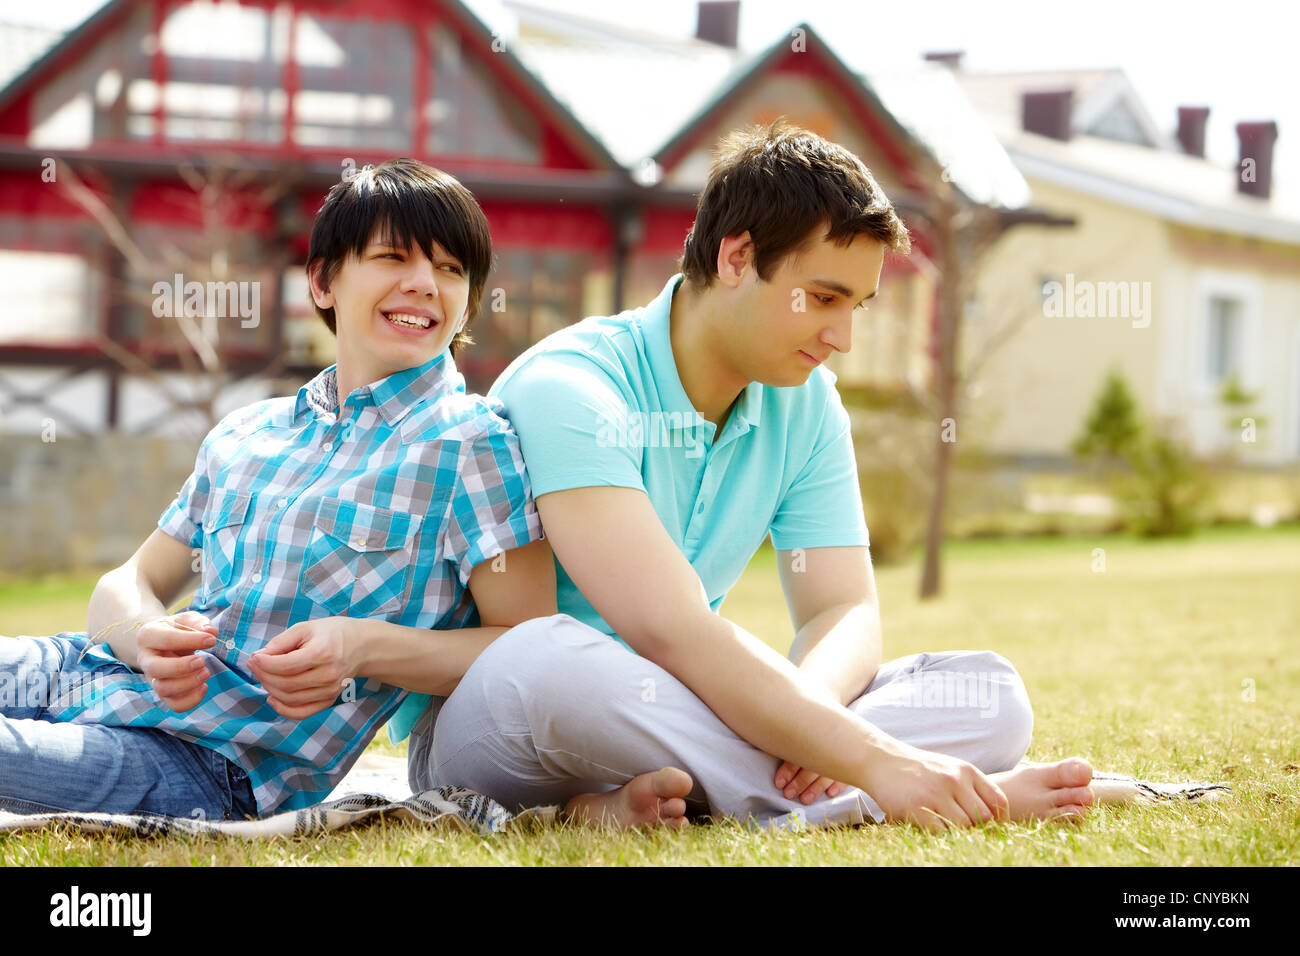 Young gays sitting together on the lawn enjoying warm weather Stock Photo